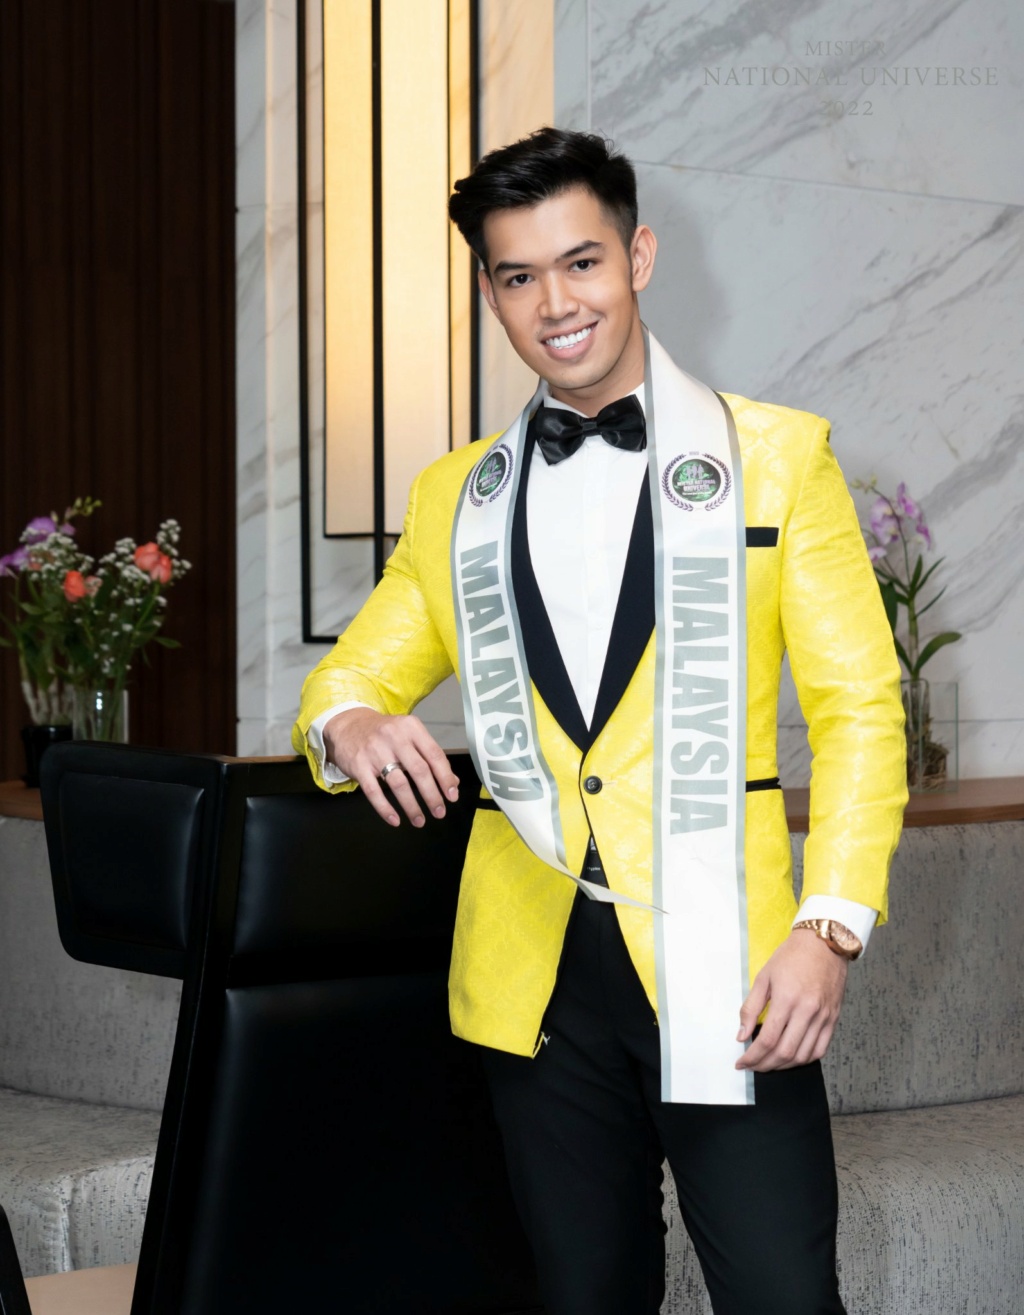 Mister National Universe 2022 is Việt Hoàng from Vietnam 28489512